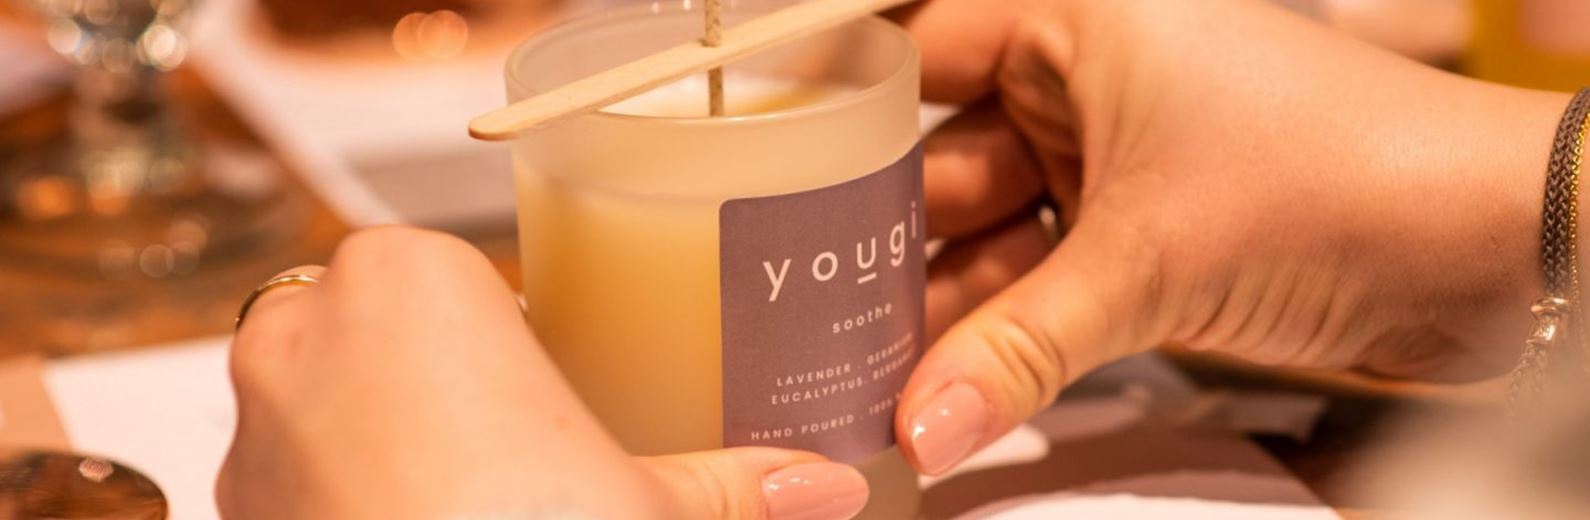 Brugal 1888 Rum & Craft Candle Making with Yougi